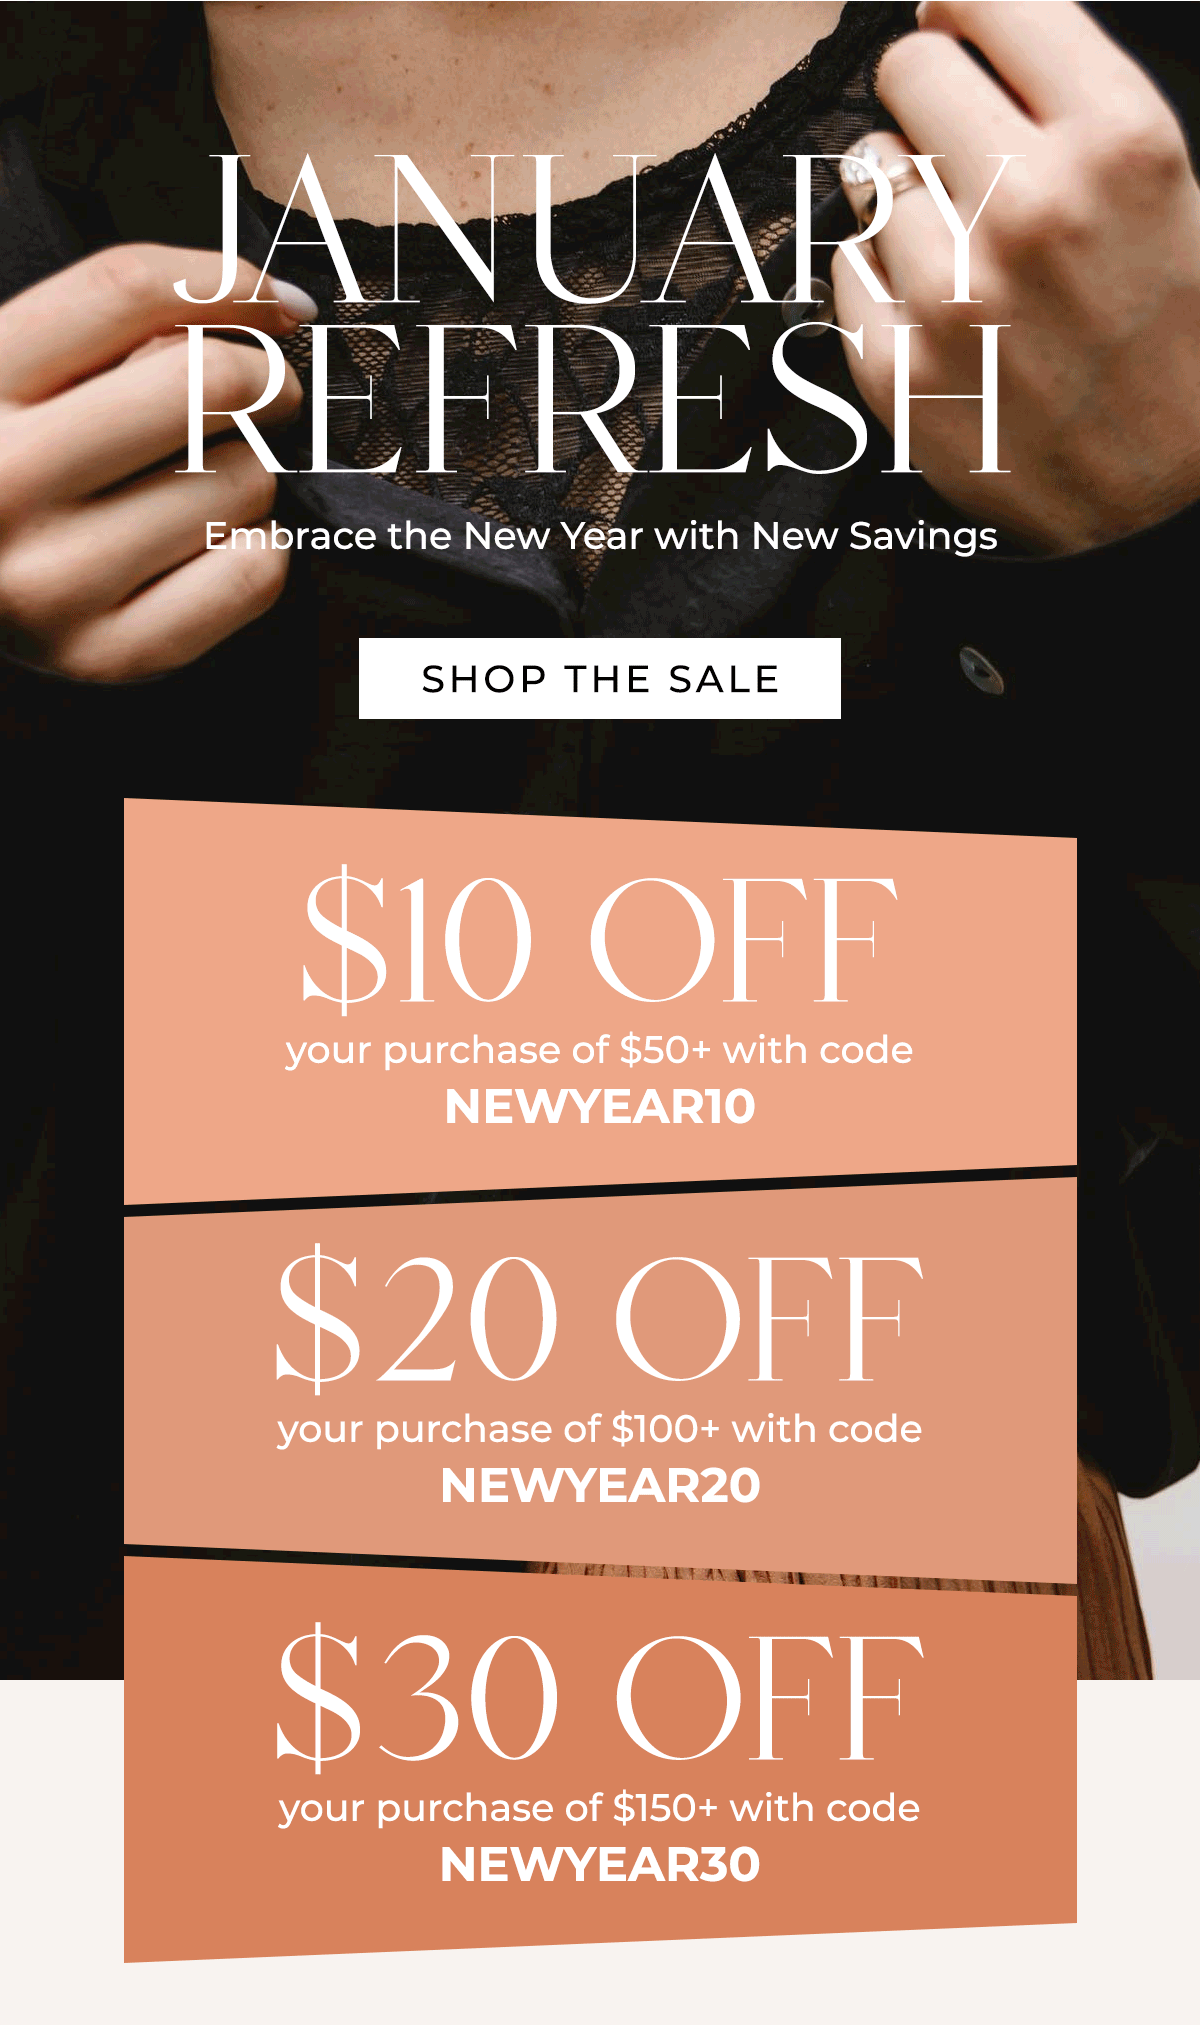 January Refresh Embrace the New Year with New Savings \\$10 off your purchase of \\$50+ Code: NEWYEAR10 \\$20 off your purchase of \\$100+ Code: NEWYEAR20 \\$30 off your purchase of \\$150+ Code: NEWYEAR30